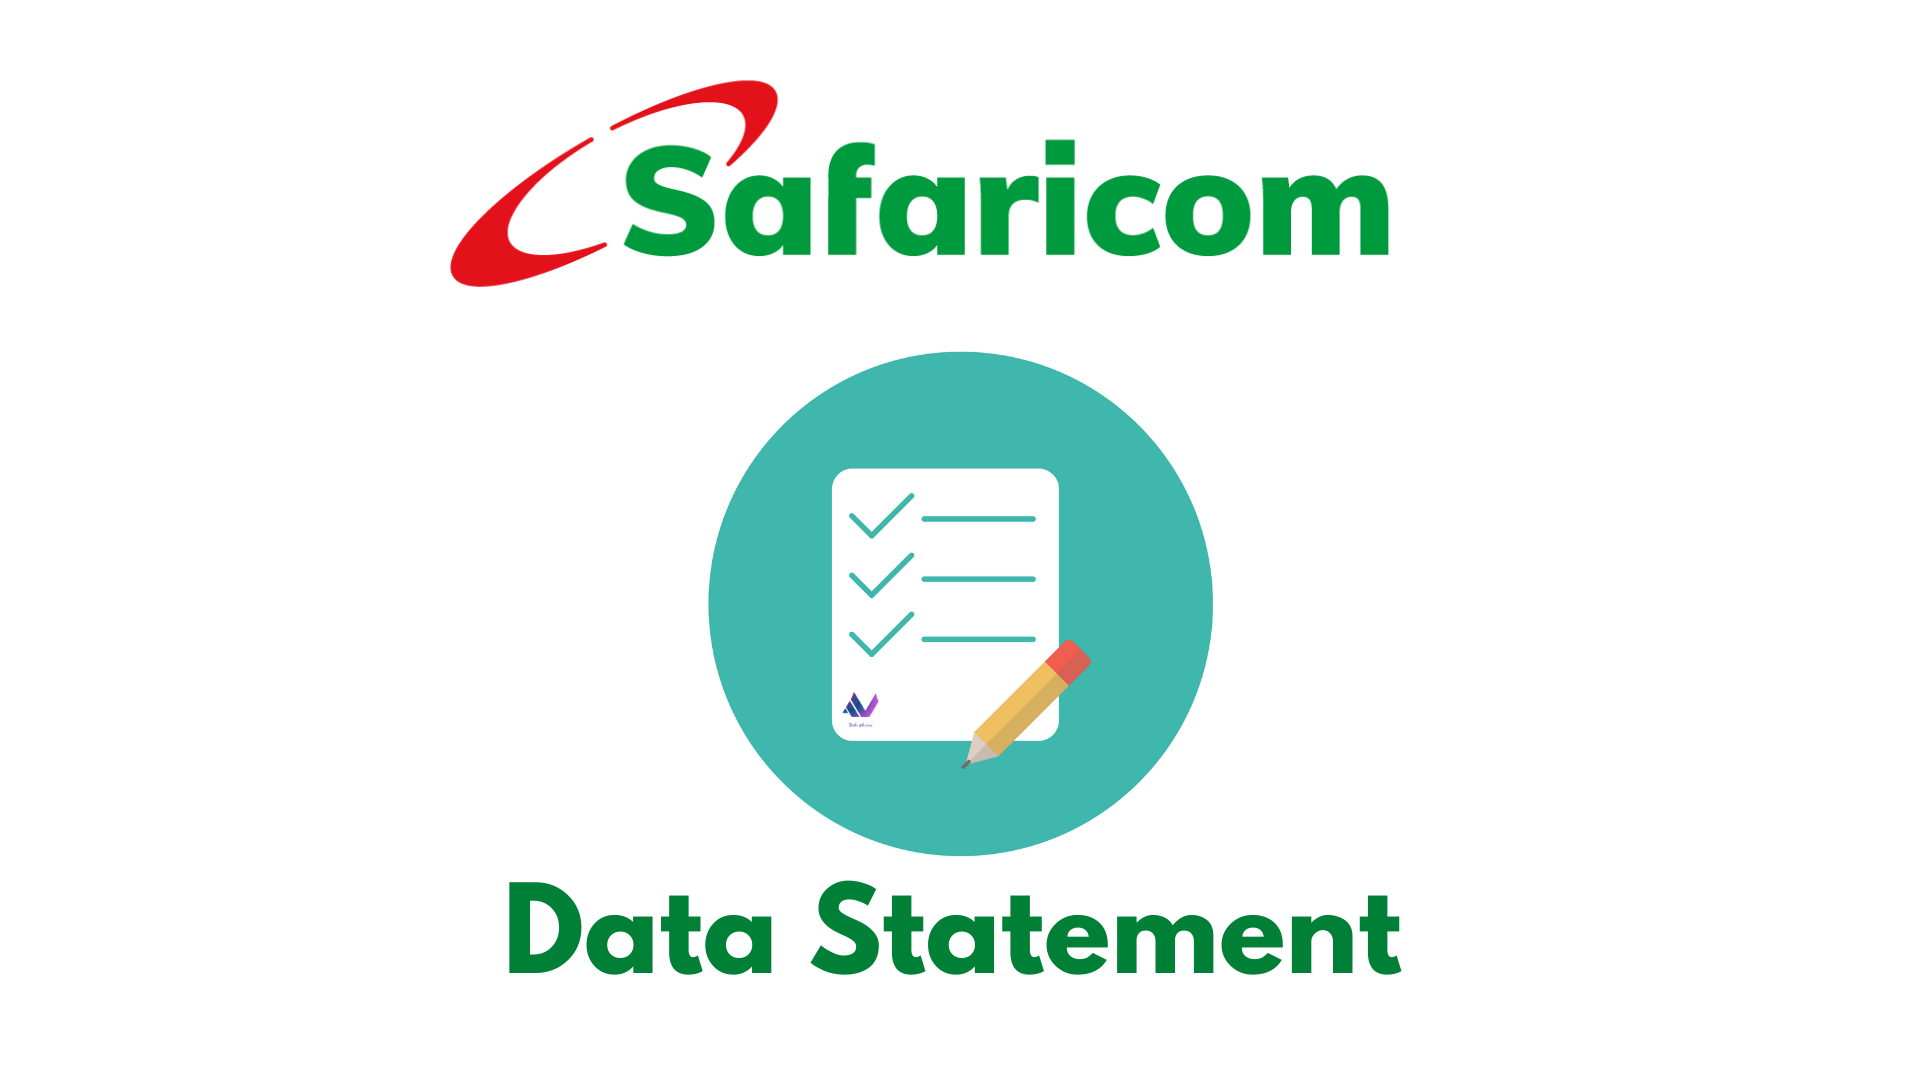 How to get a proper breakdown of your Safaricom Data usage